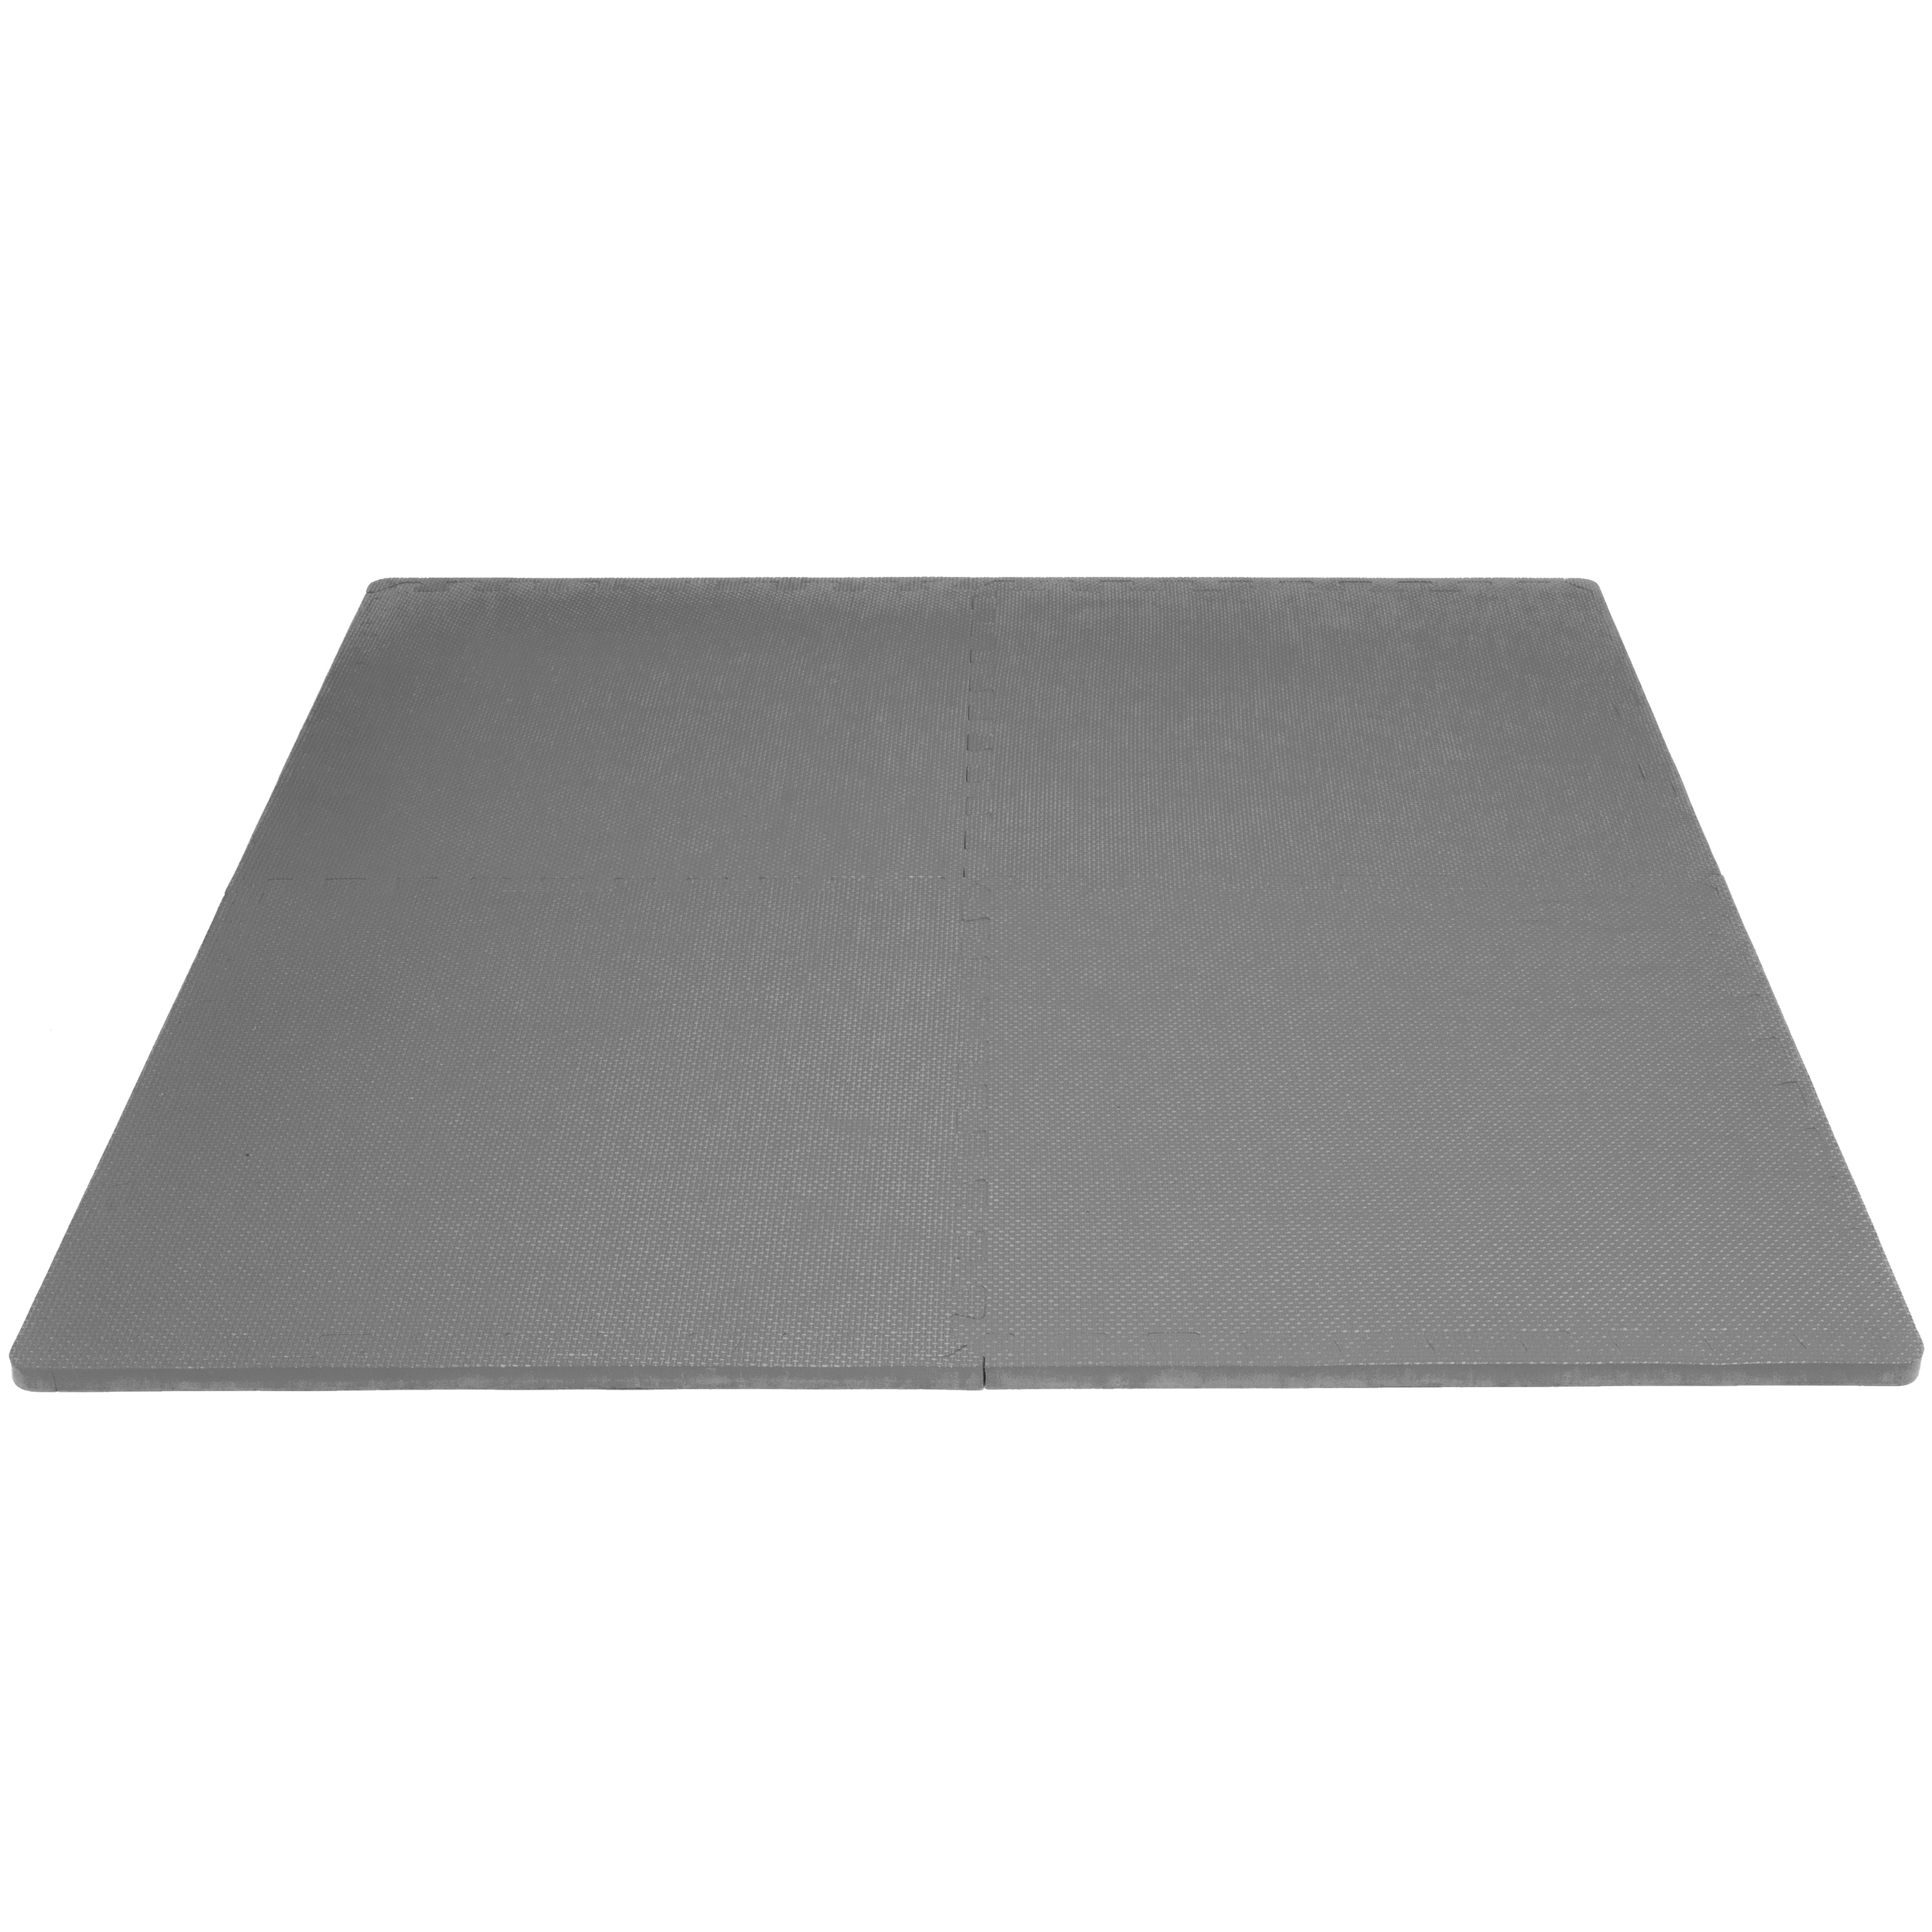 Primary Pastel 24 in. W x 24 in. L x 0.5 in. Thick Foam Exercise\Gym  Flooring Tiles (4 Tiles\Case) (16 sq. ft.)